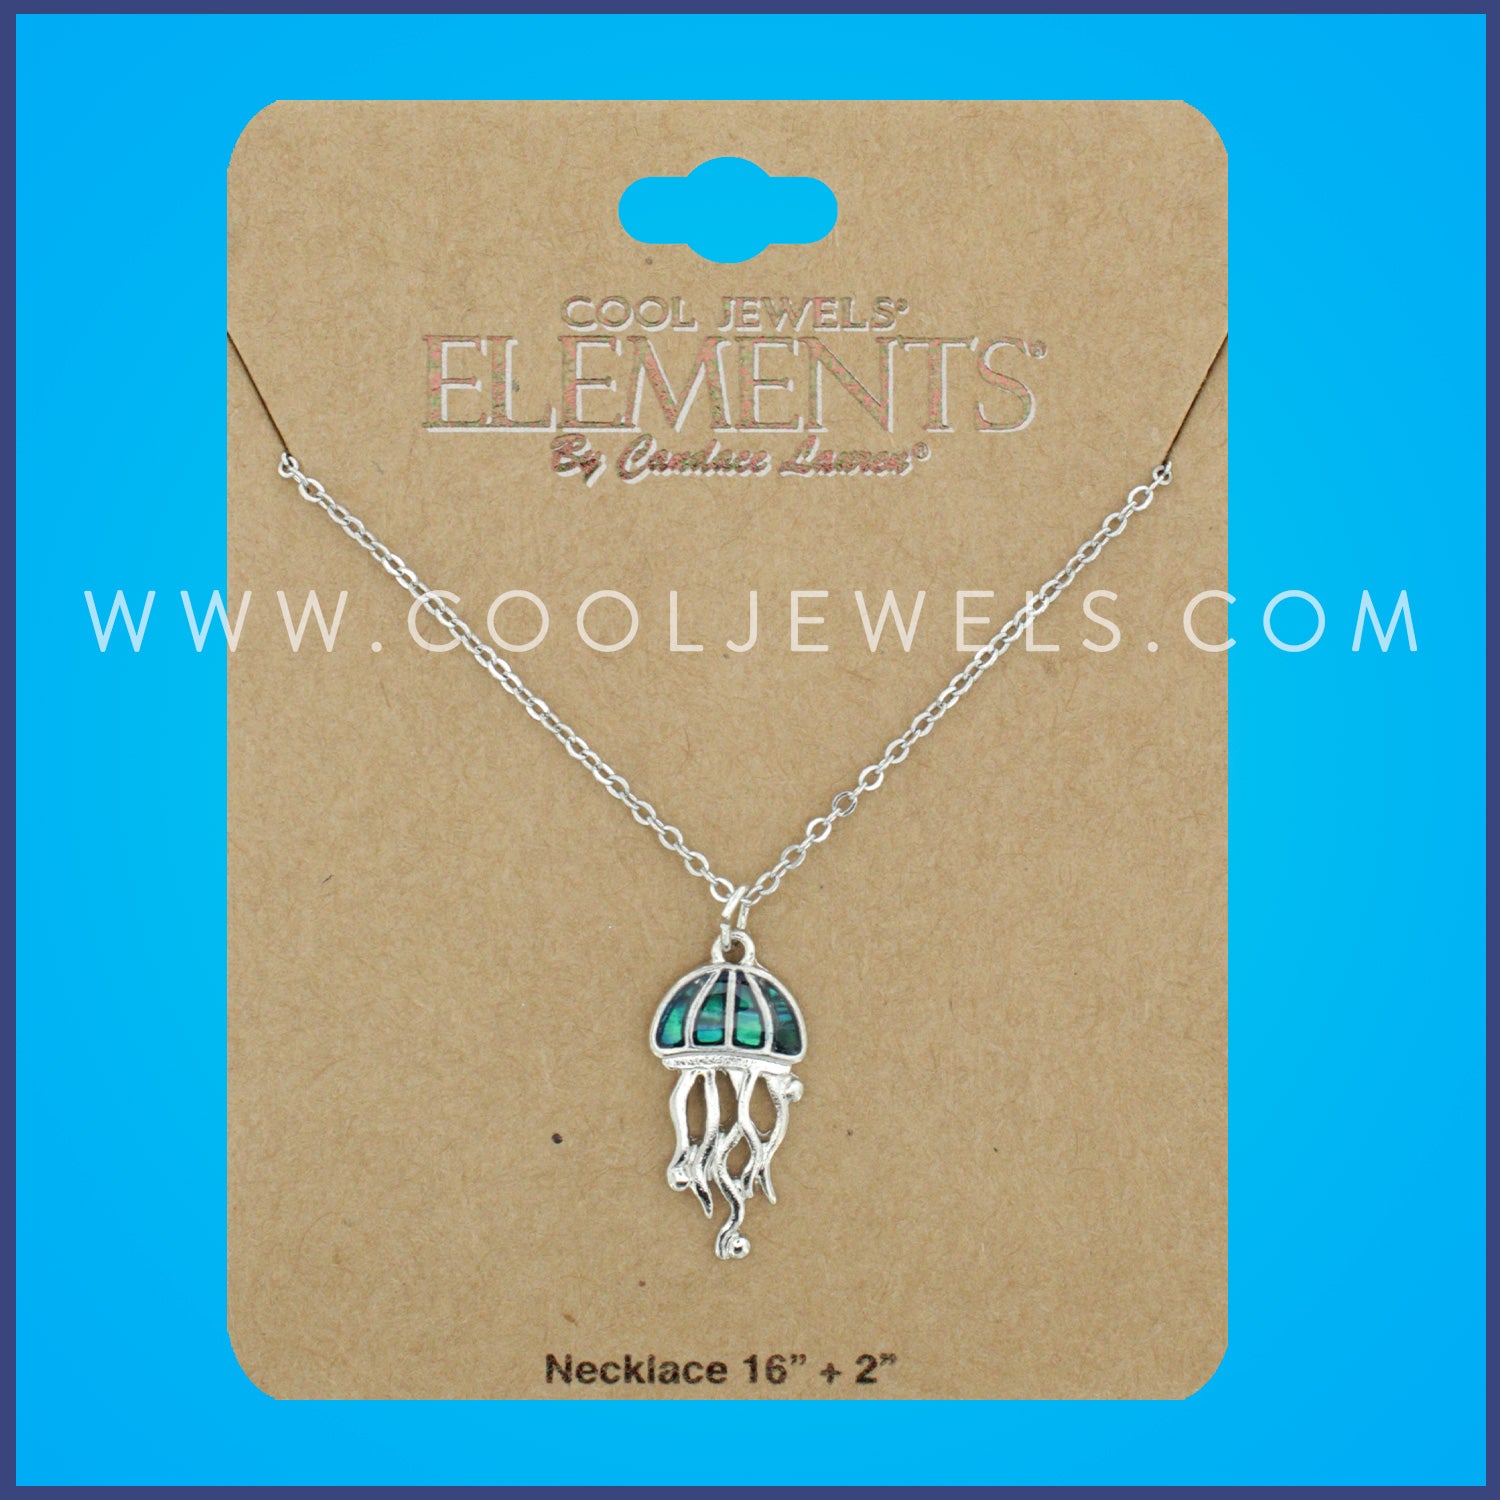 LINK CHAIN NECKLACE WITH PAUA SHELL JELLY FISH PENDANT - CARDED